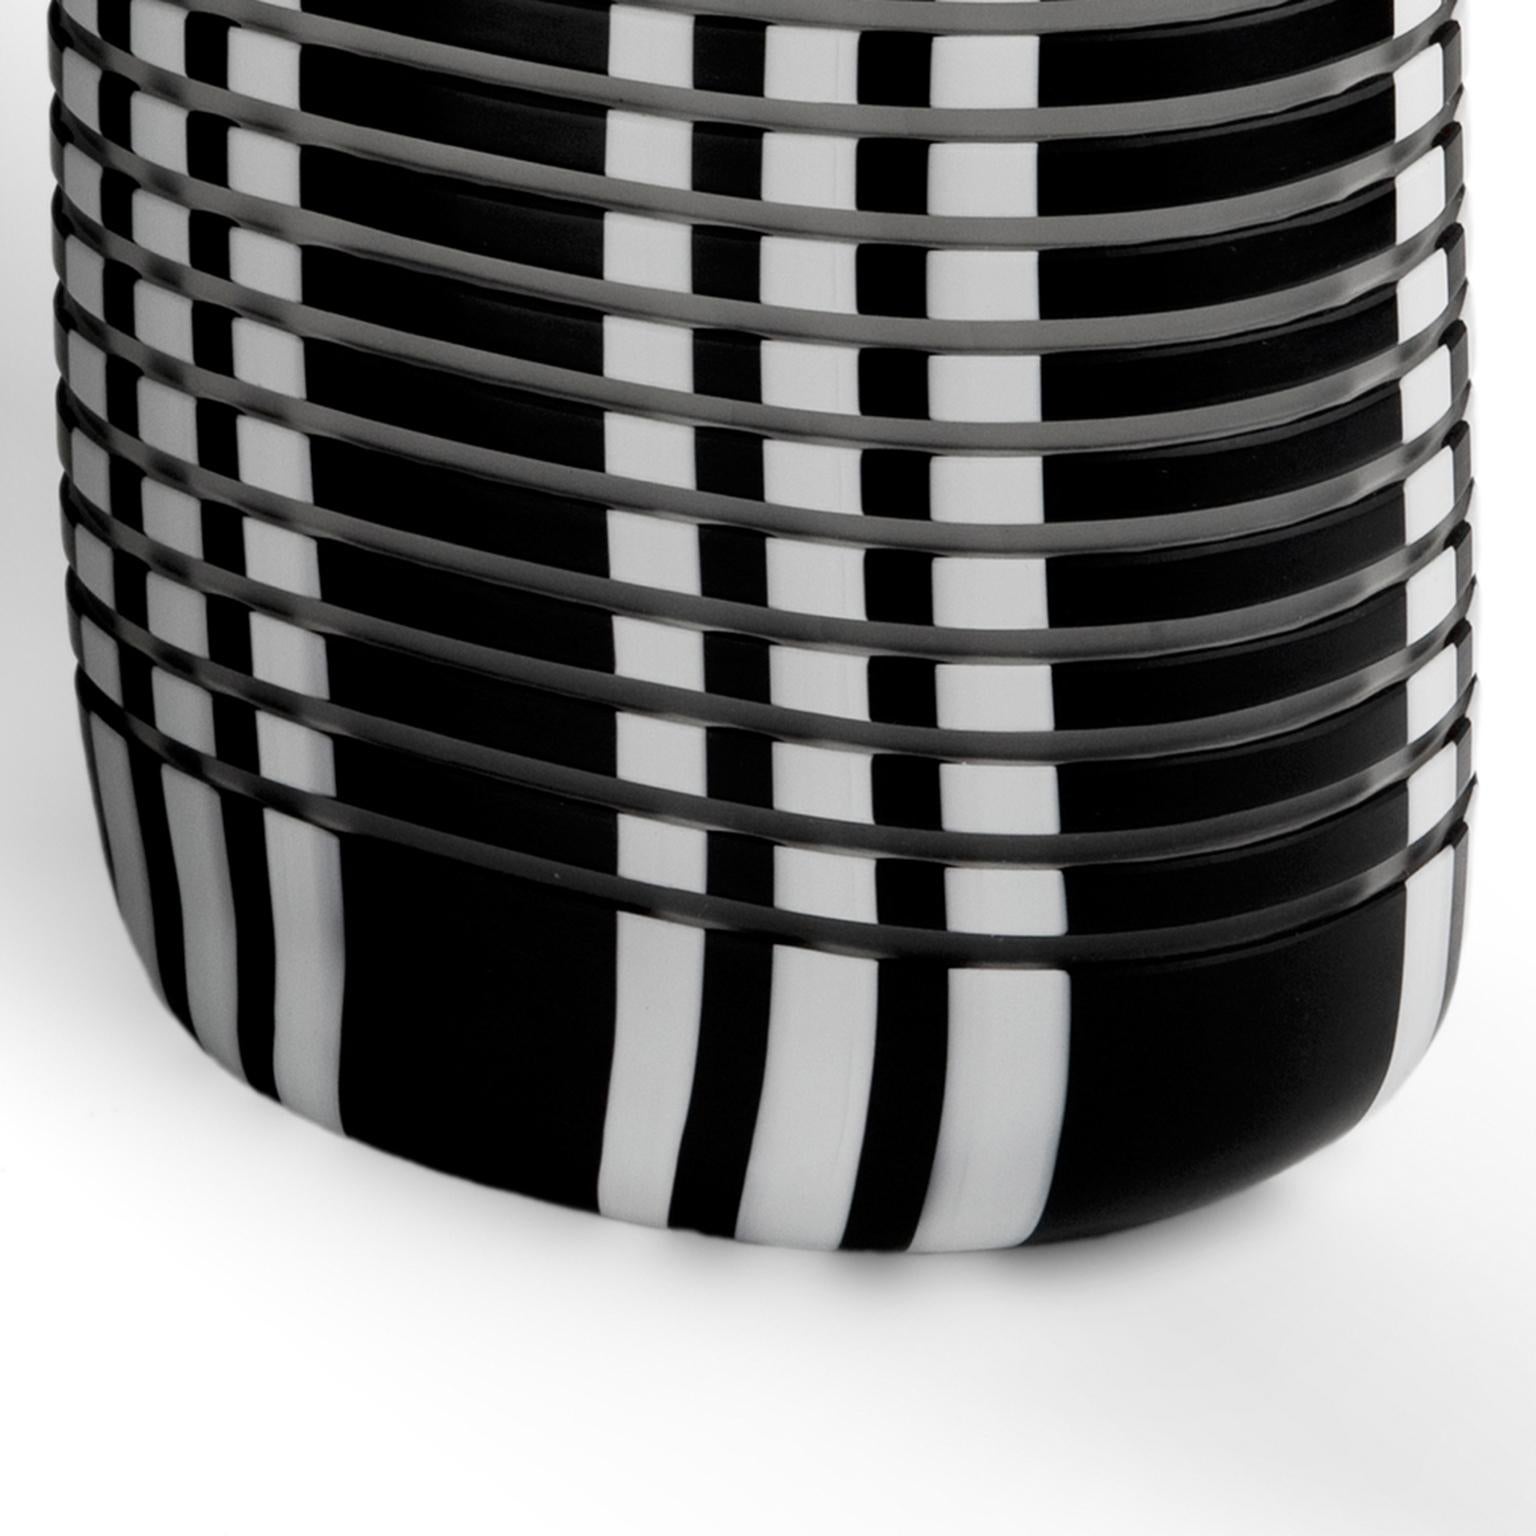 Dutch Glass object. Crystal Long Black and White Stripe For Sale